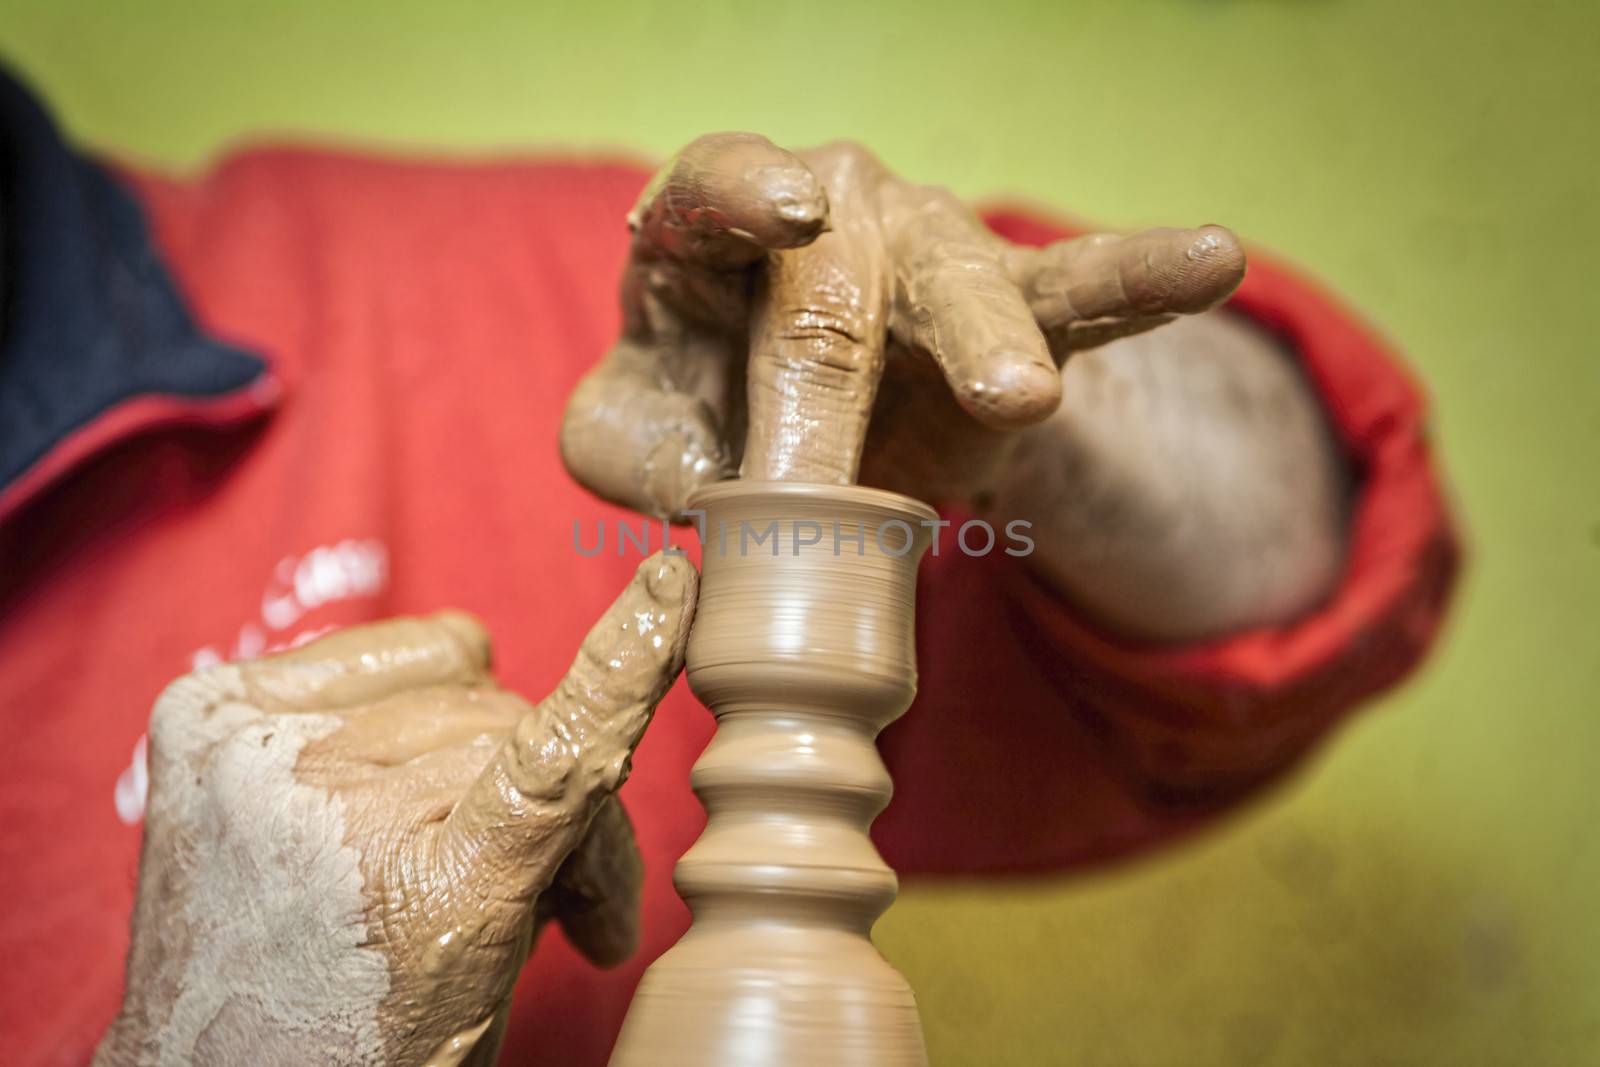 Potter making a humble candle holder of ceramics with their hand by digicomphoto